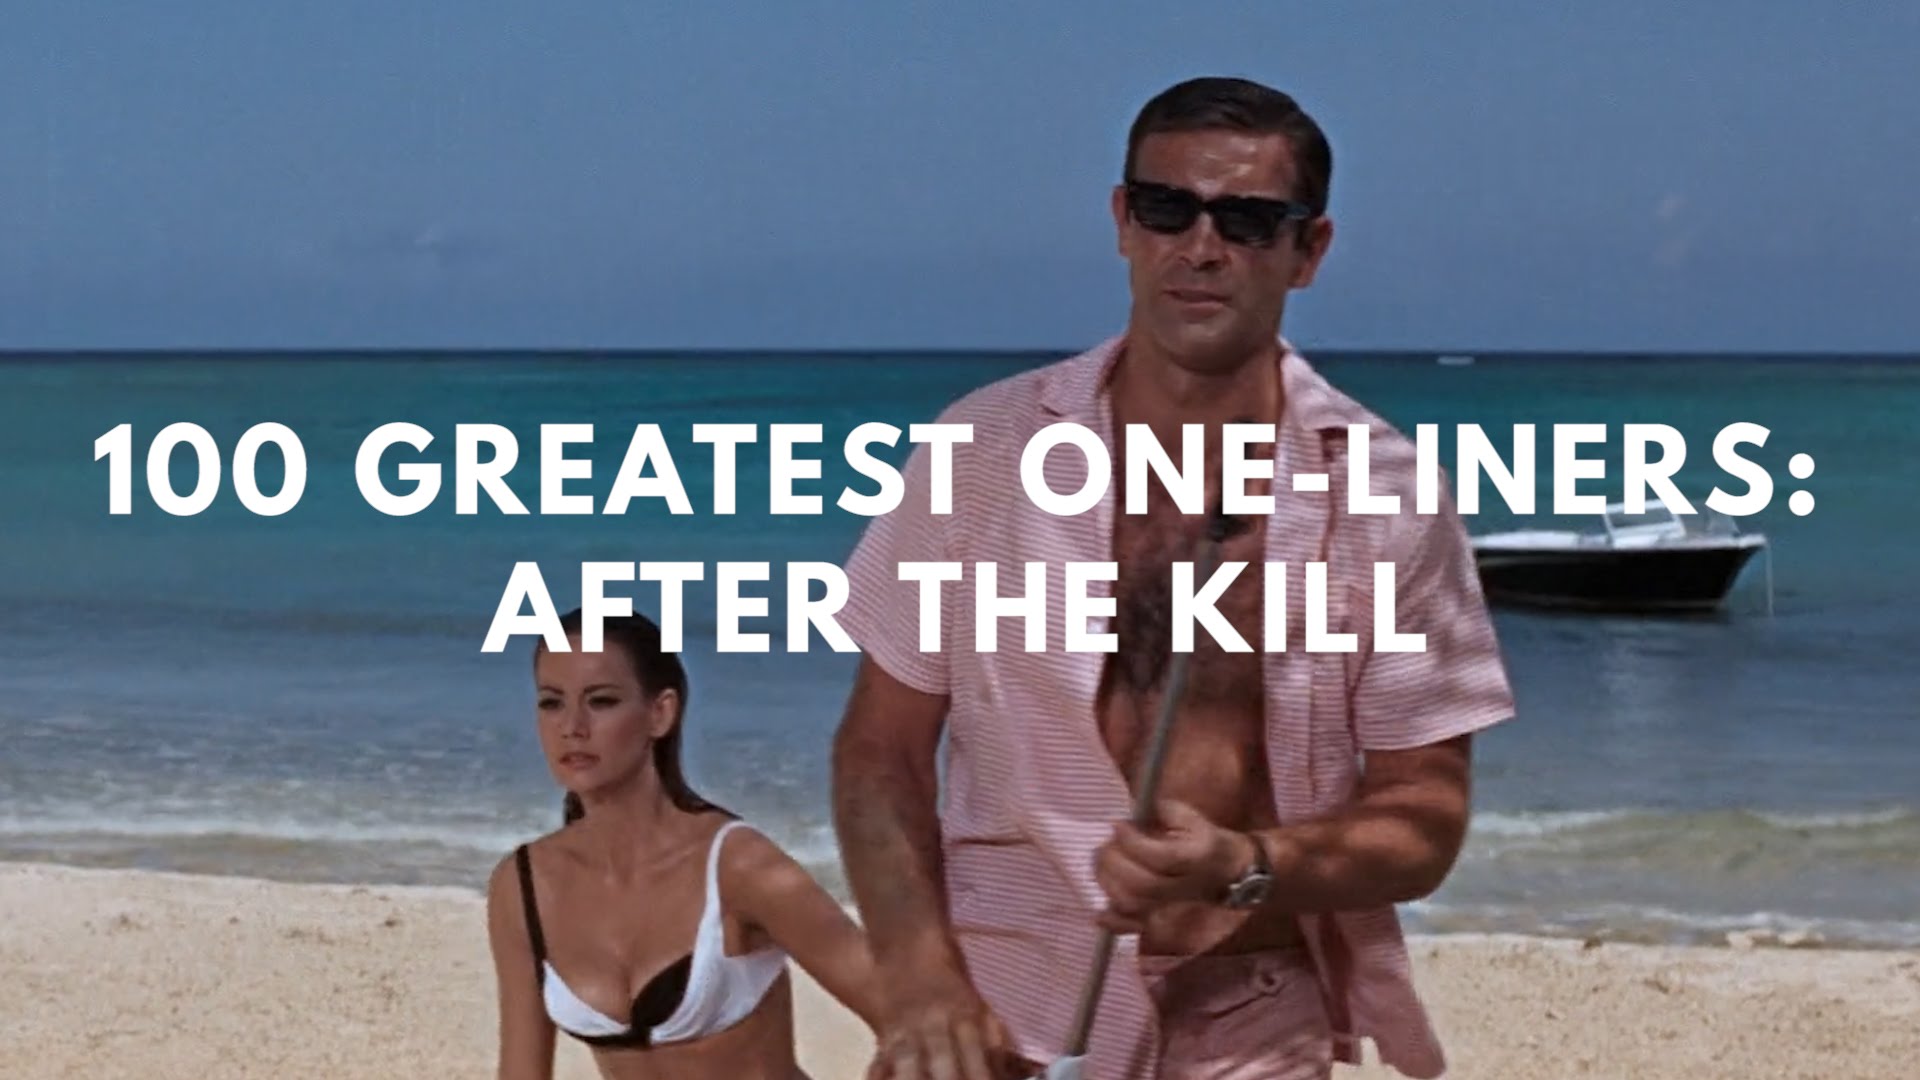 A Supercut Featuring Some Of The Best Movie Lines Delivered After A Kill